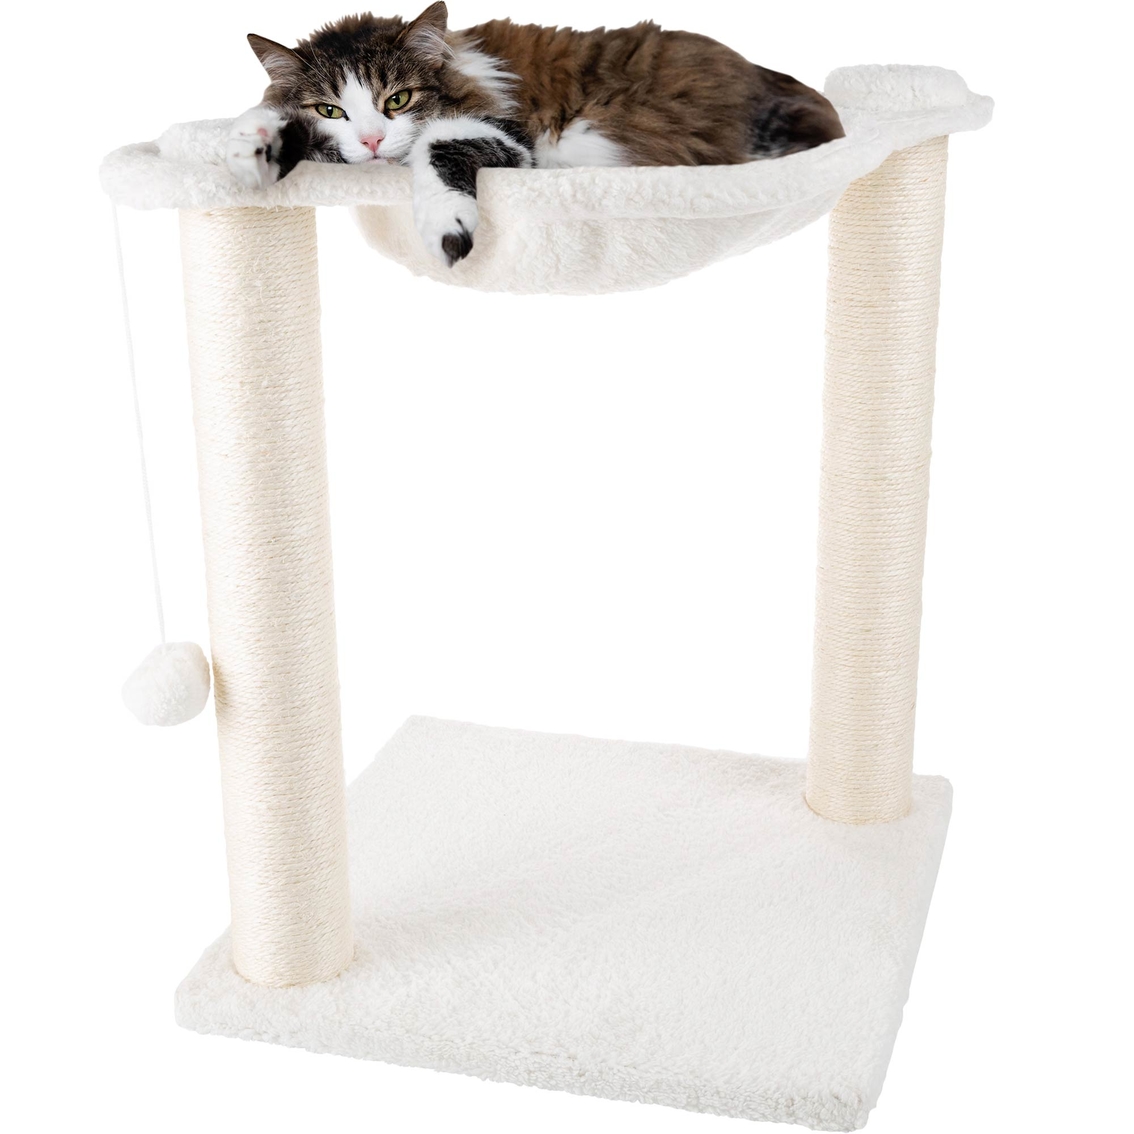 Petmaker Cat Tree and Scratcher Hammock Style Lounging Bed - Image 5 of 7